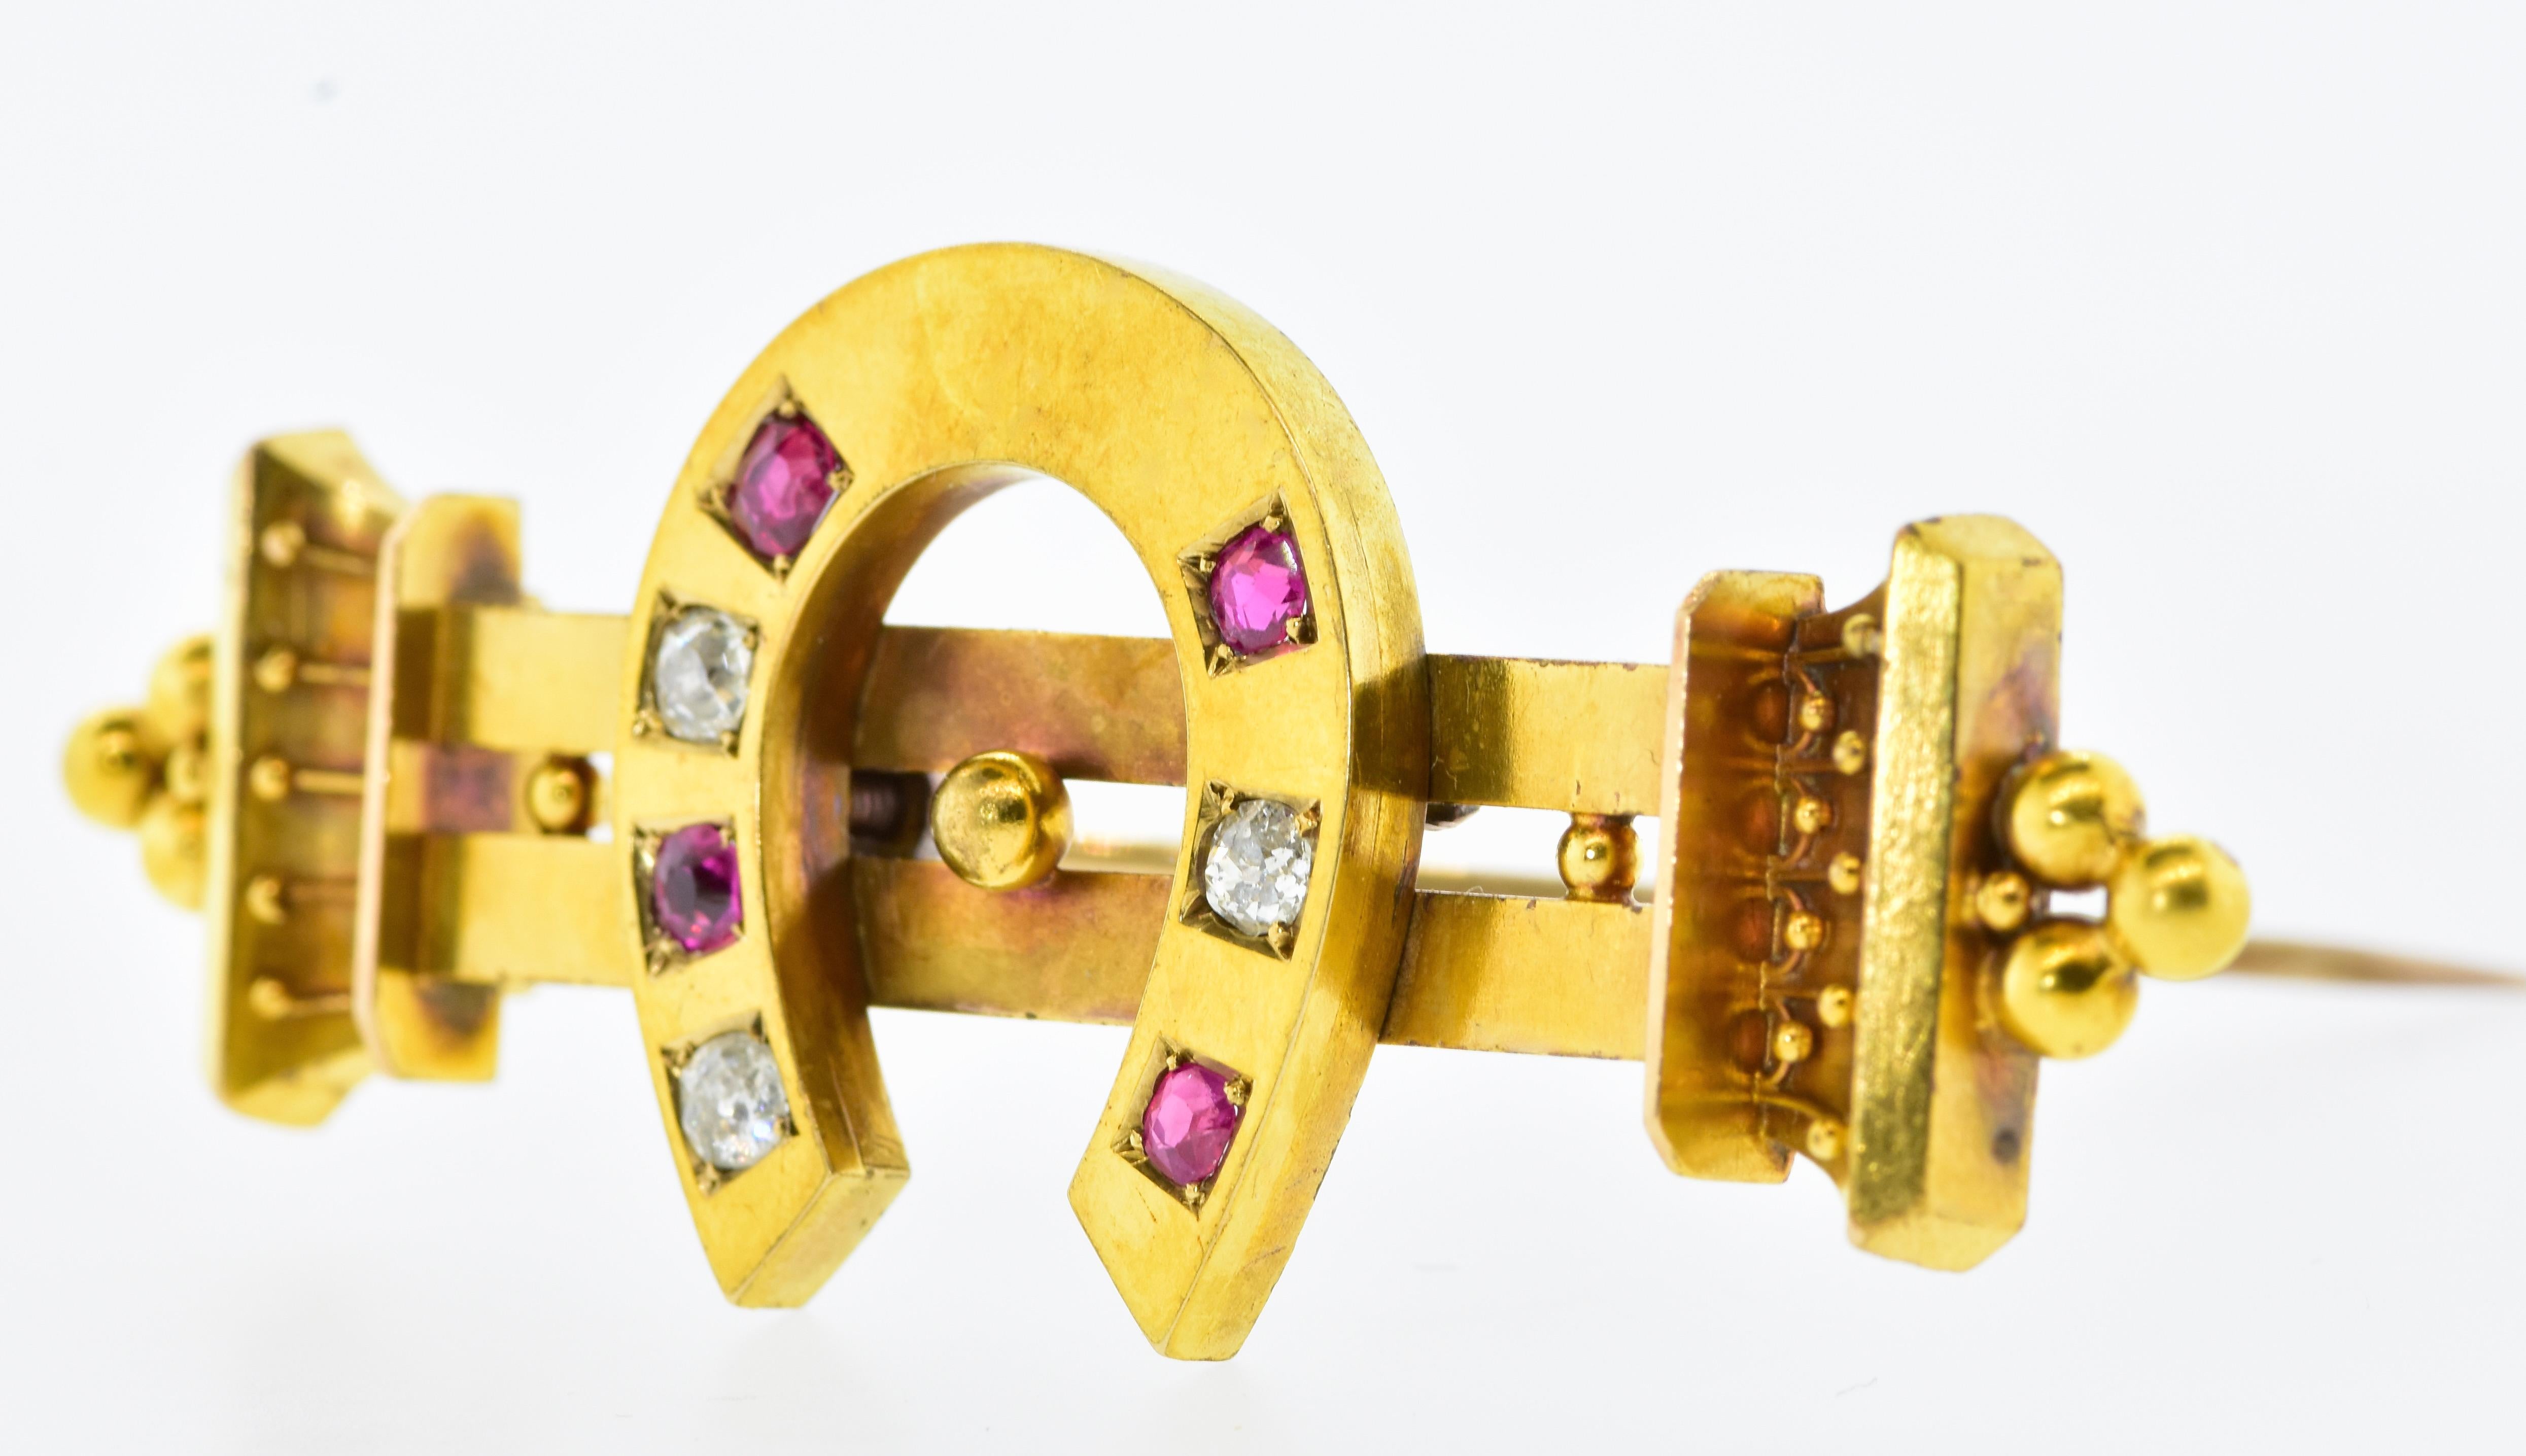 Victorian Antique 18K Pin with Rubies and Diamonds, c. 1880